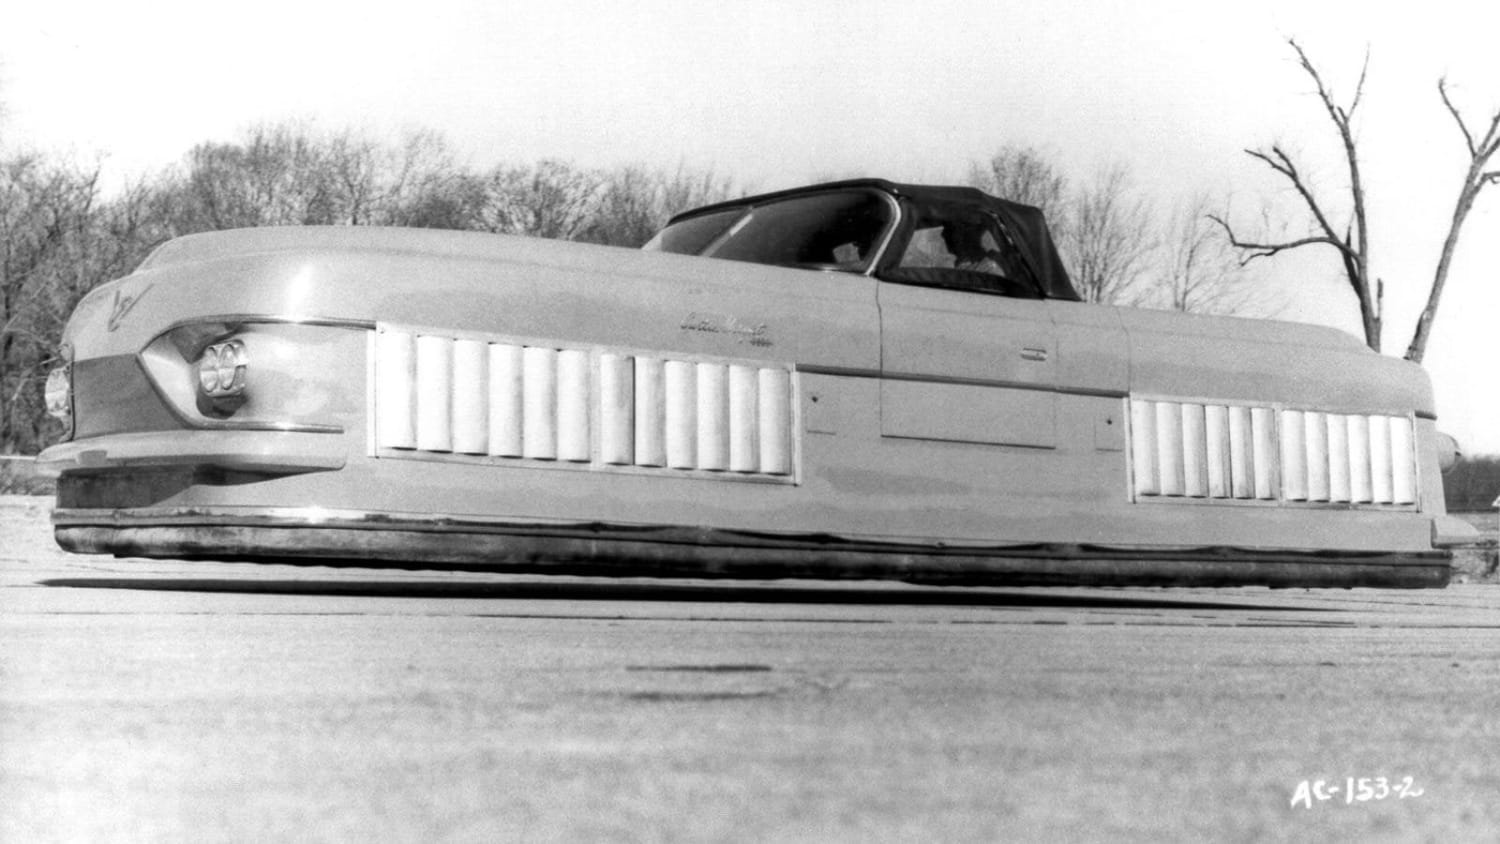 The 1959 Curtiss-Wright's ground effect wonder